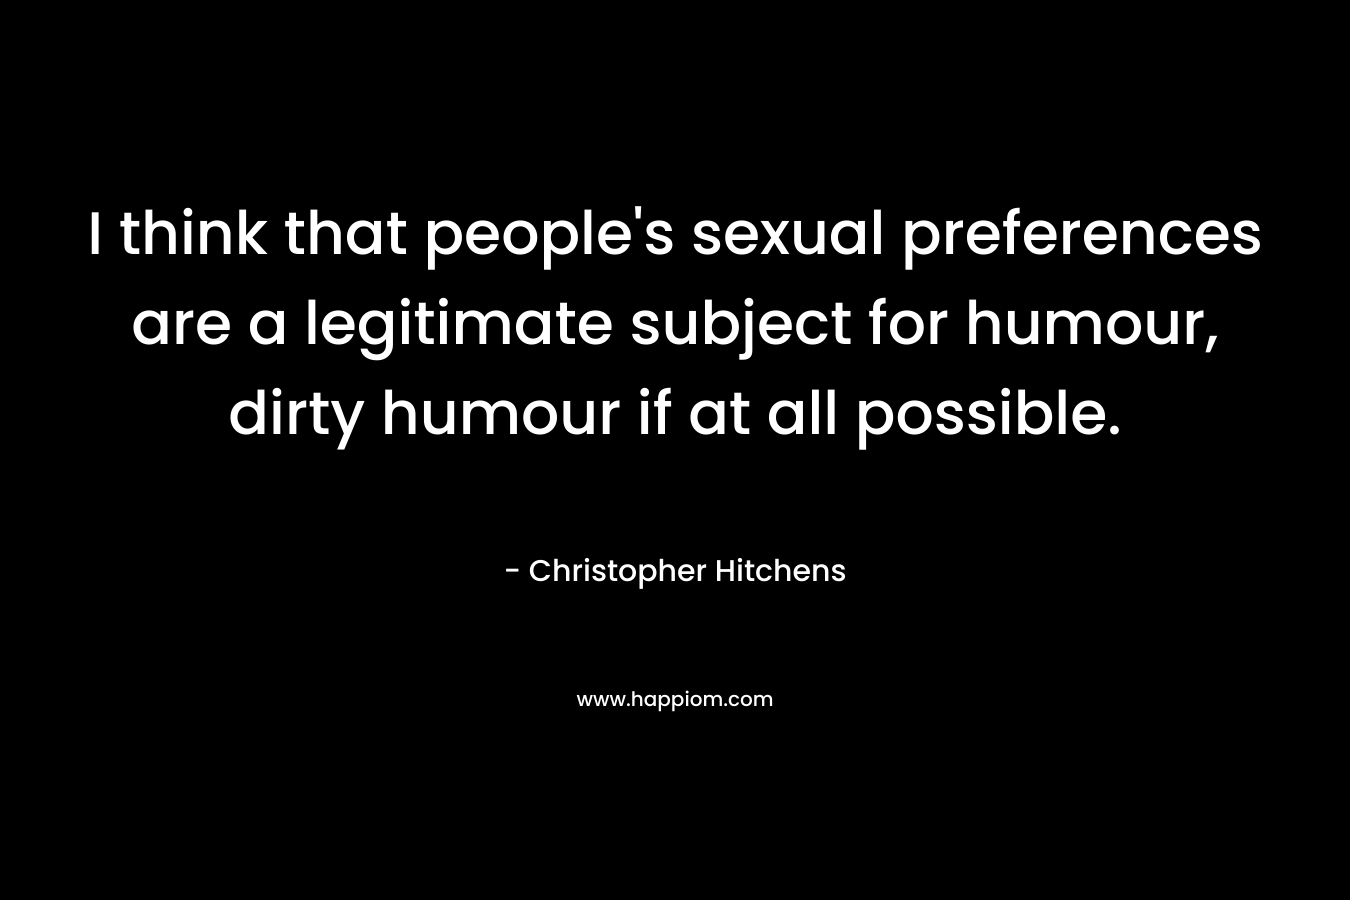 I think that people's sexual preferences are a legitimate subject for humour, dirty humour if at all possible.